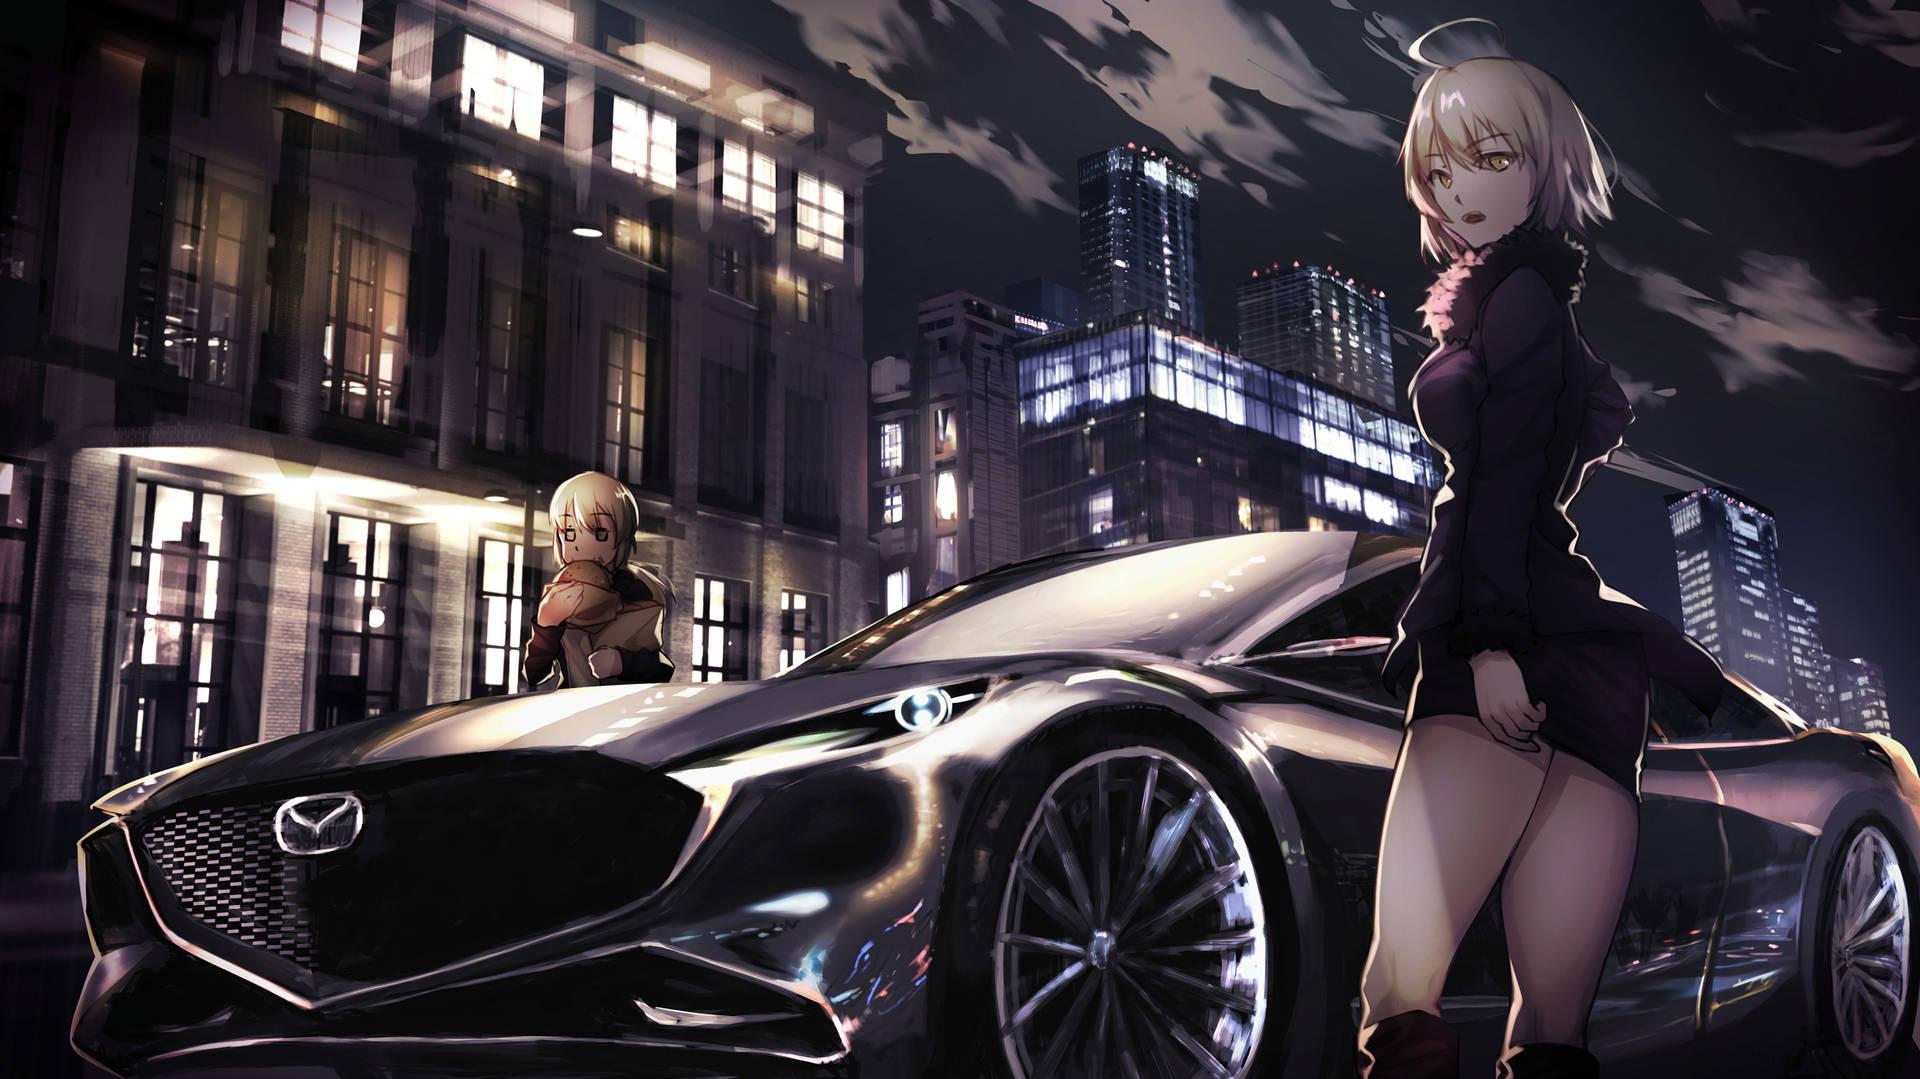 Download Two Girls And A Mazda Car Anime Wallpaper